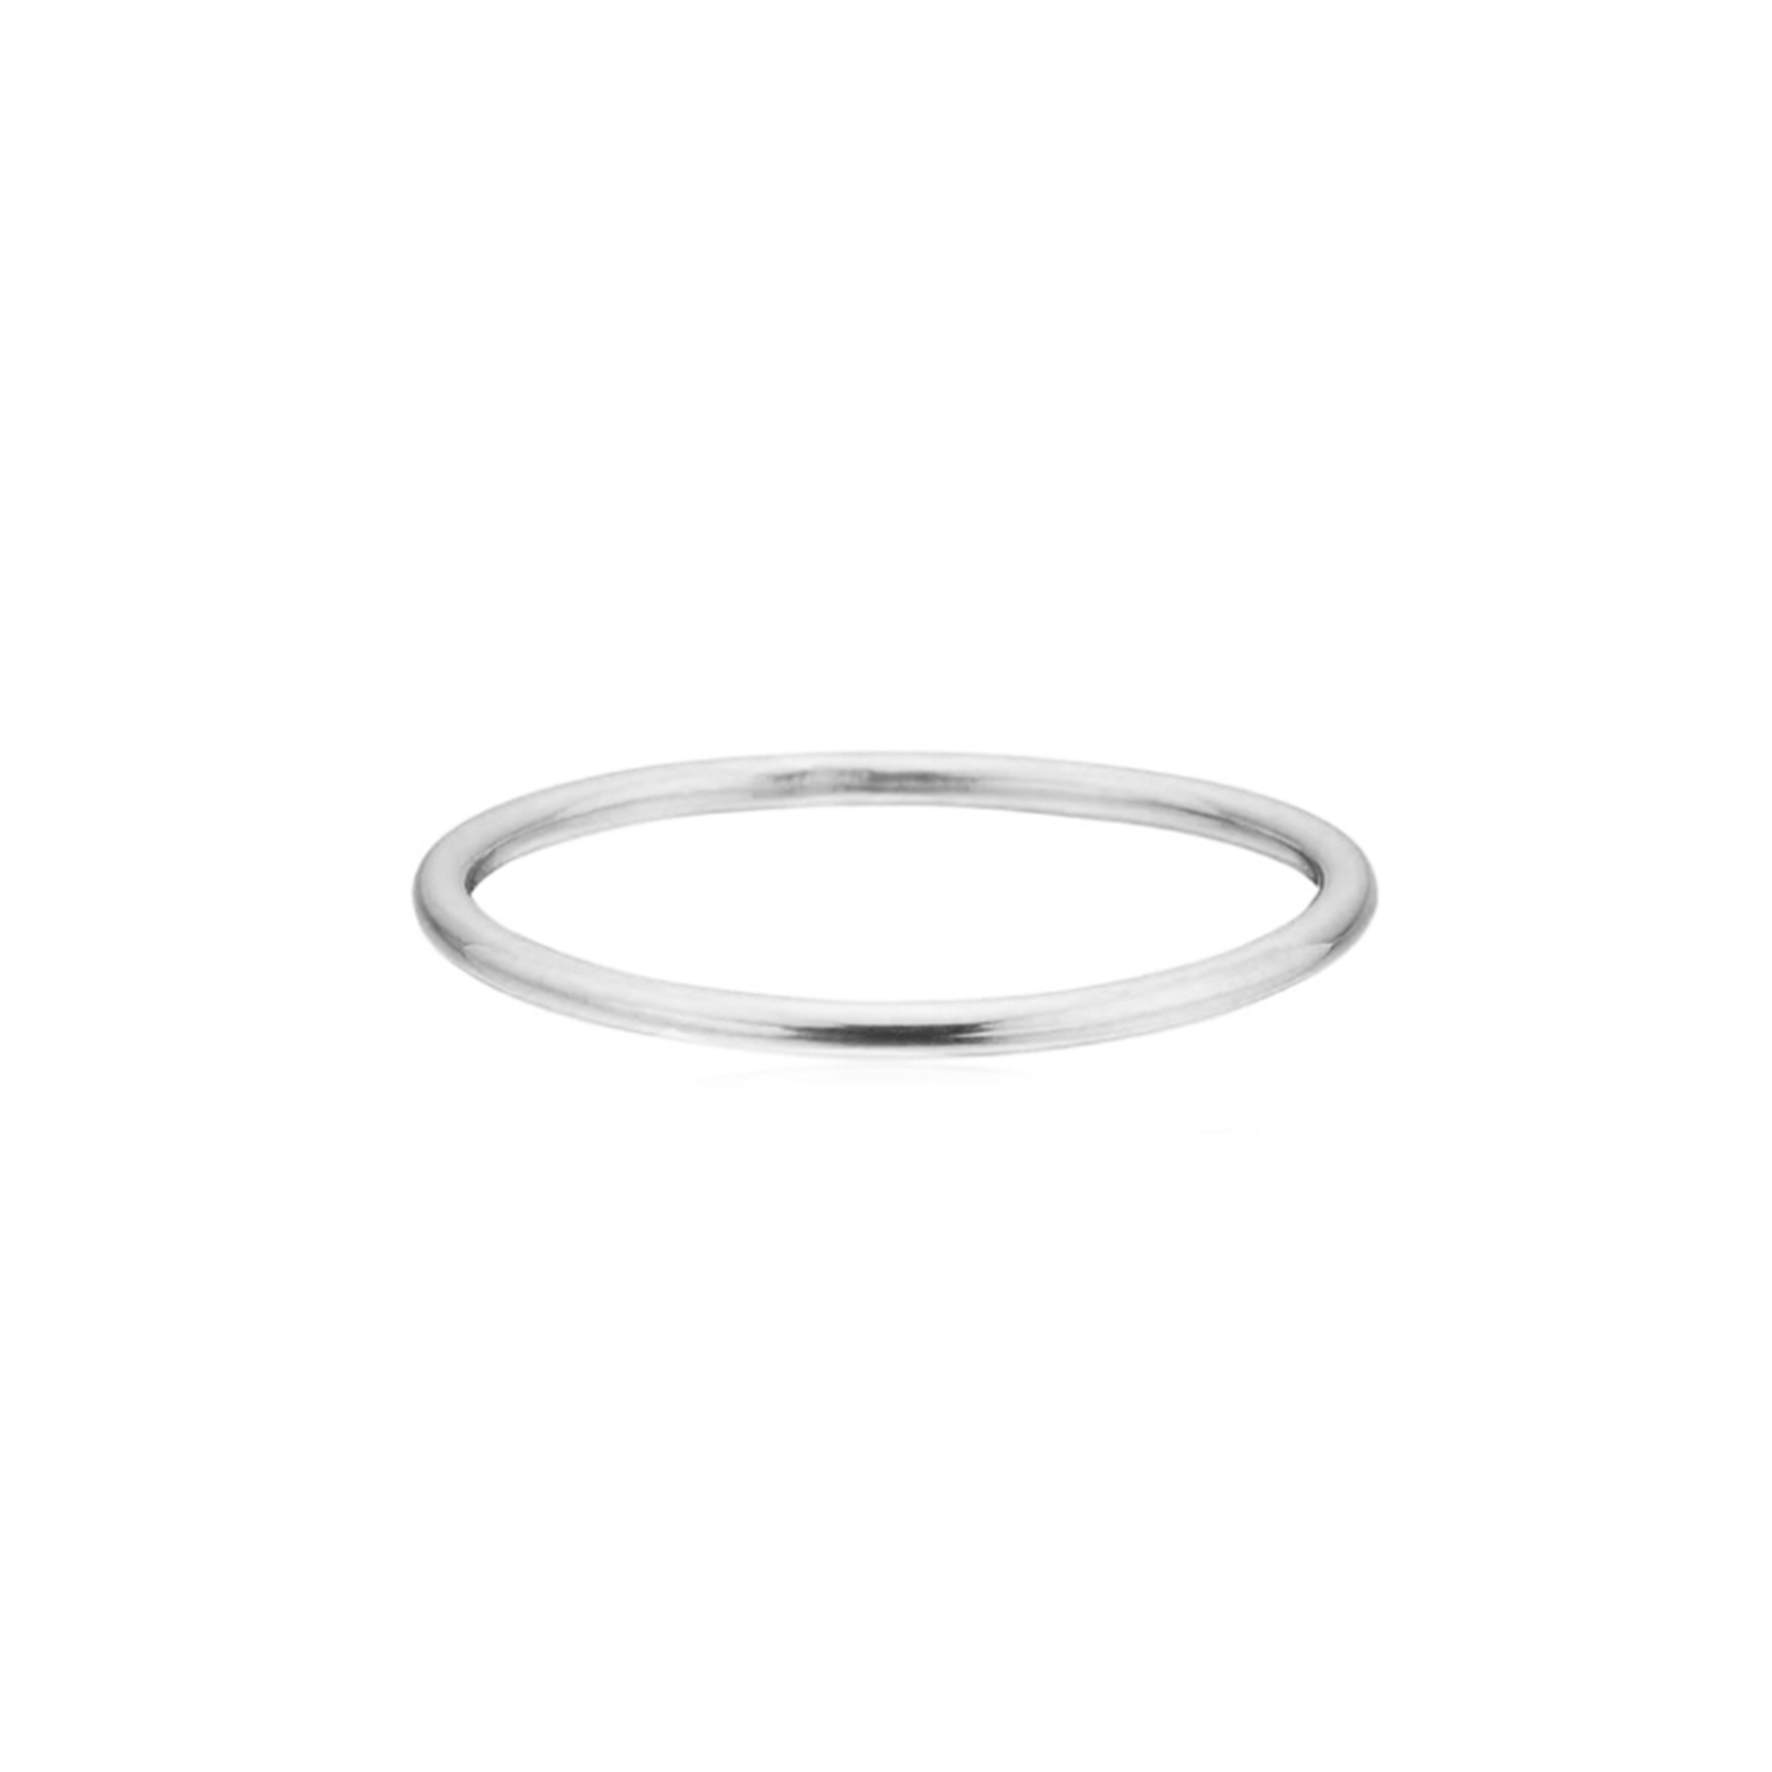 Circle Ring from Sistie in Silver Sterling 925